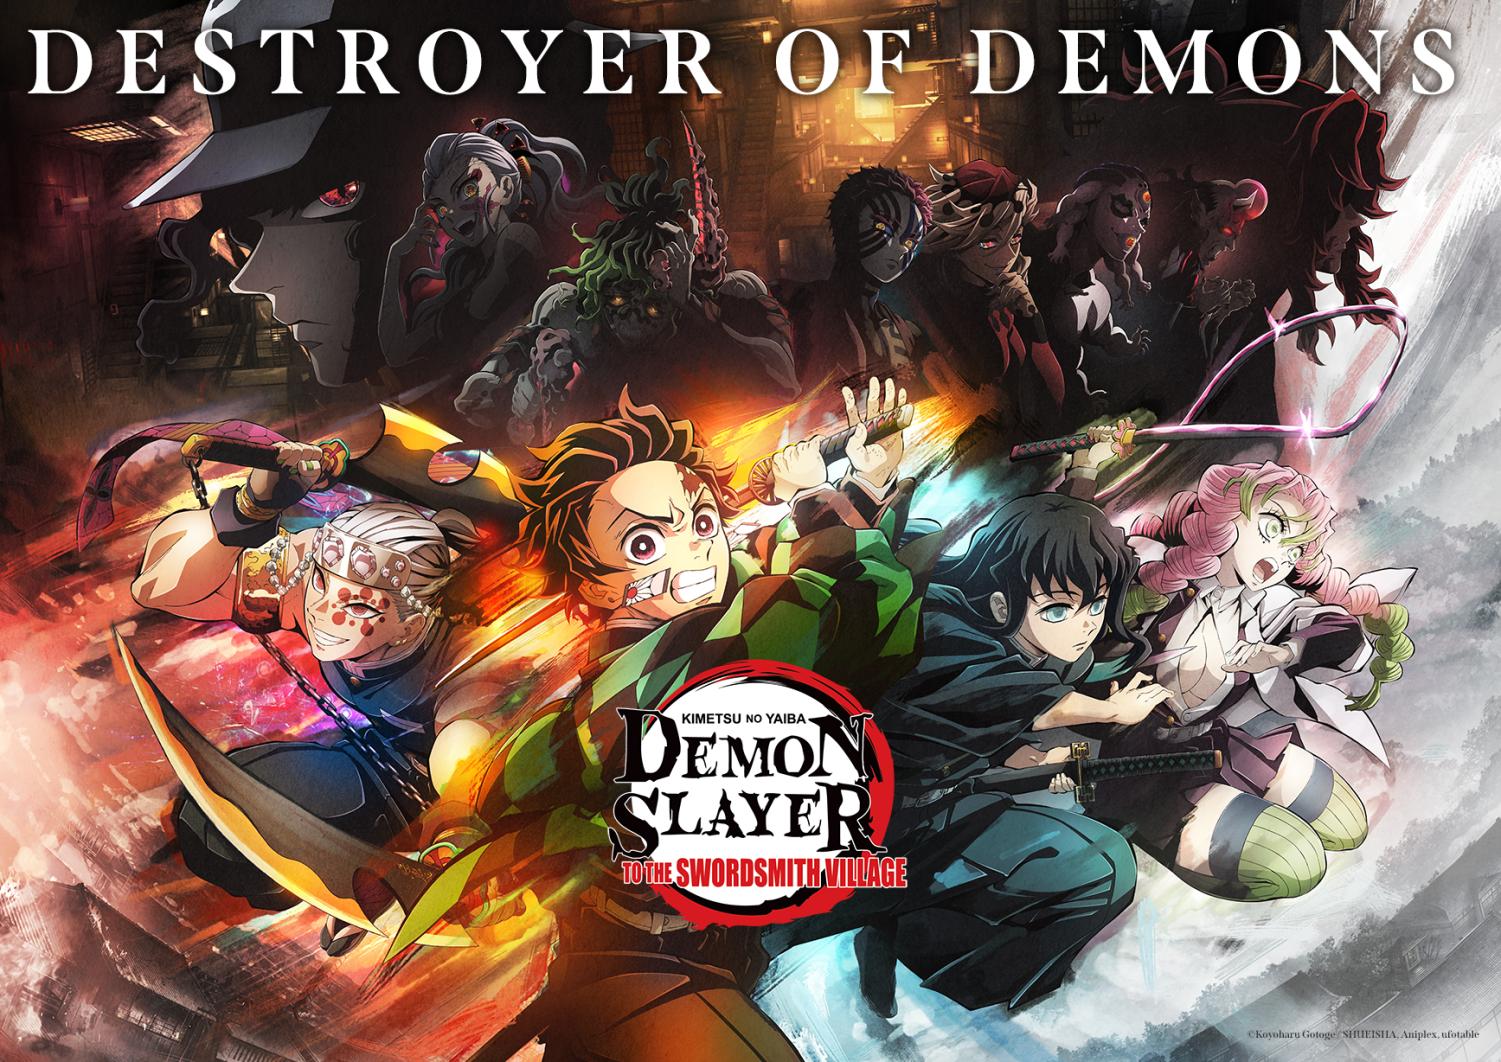 The Demon Slayer movie is finally coming to the US after breaking